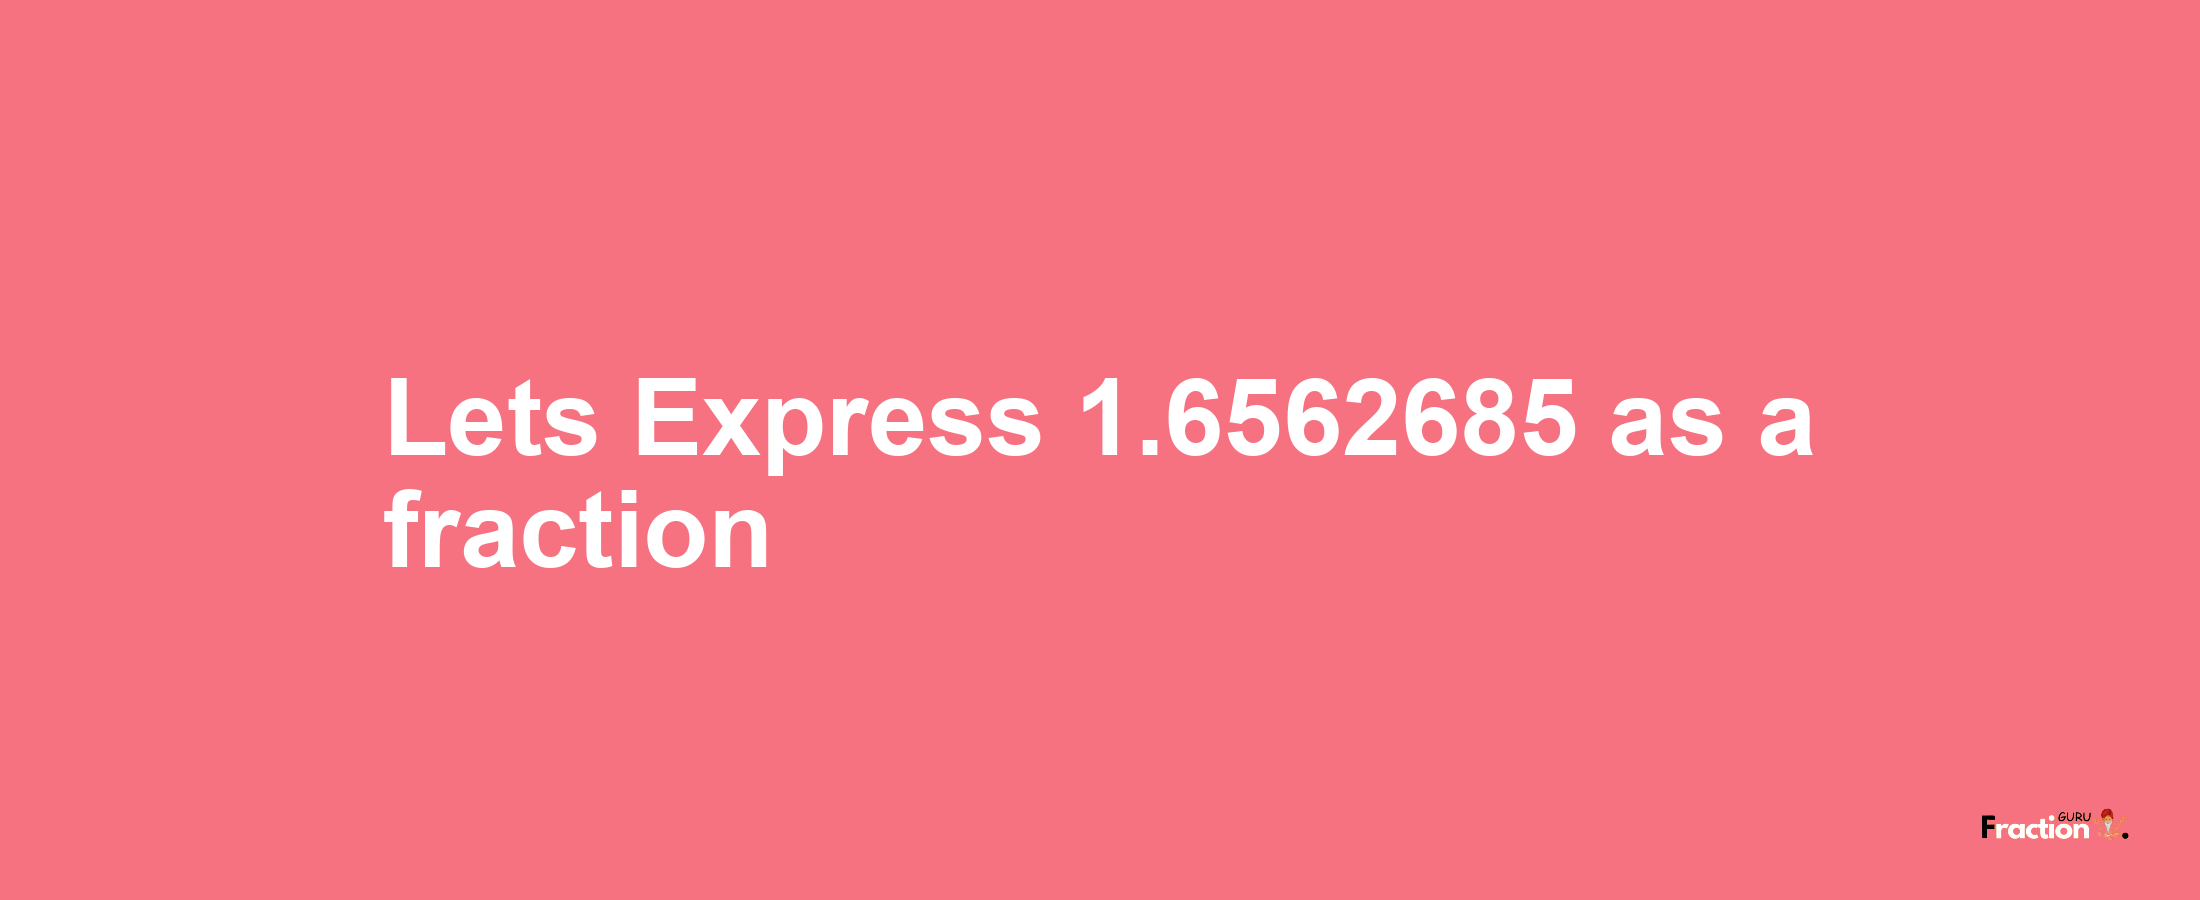 Lets Express 1.6562685 as afraction